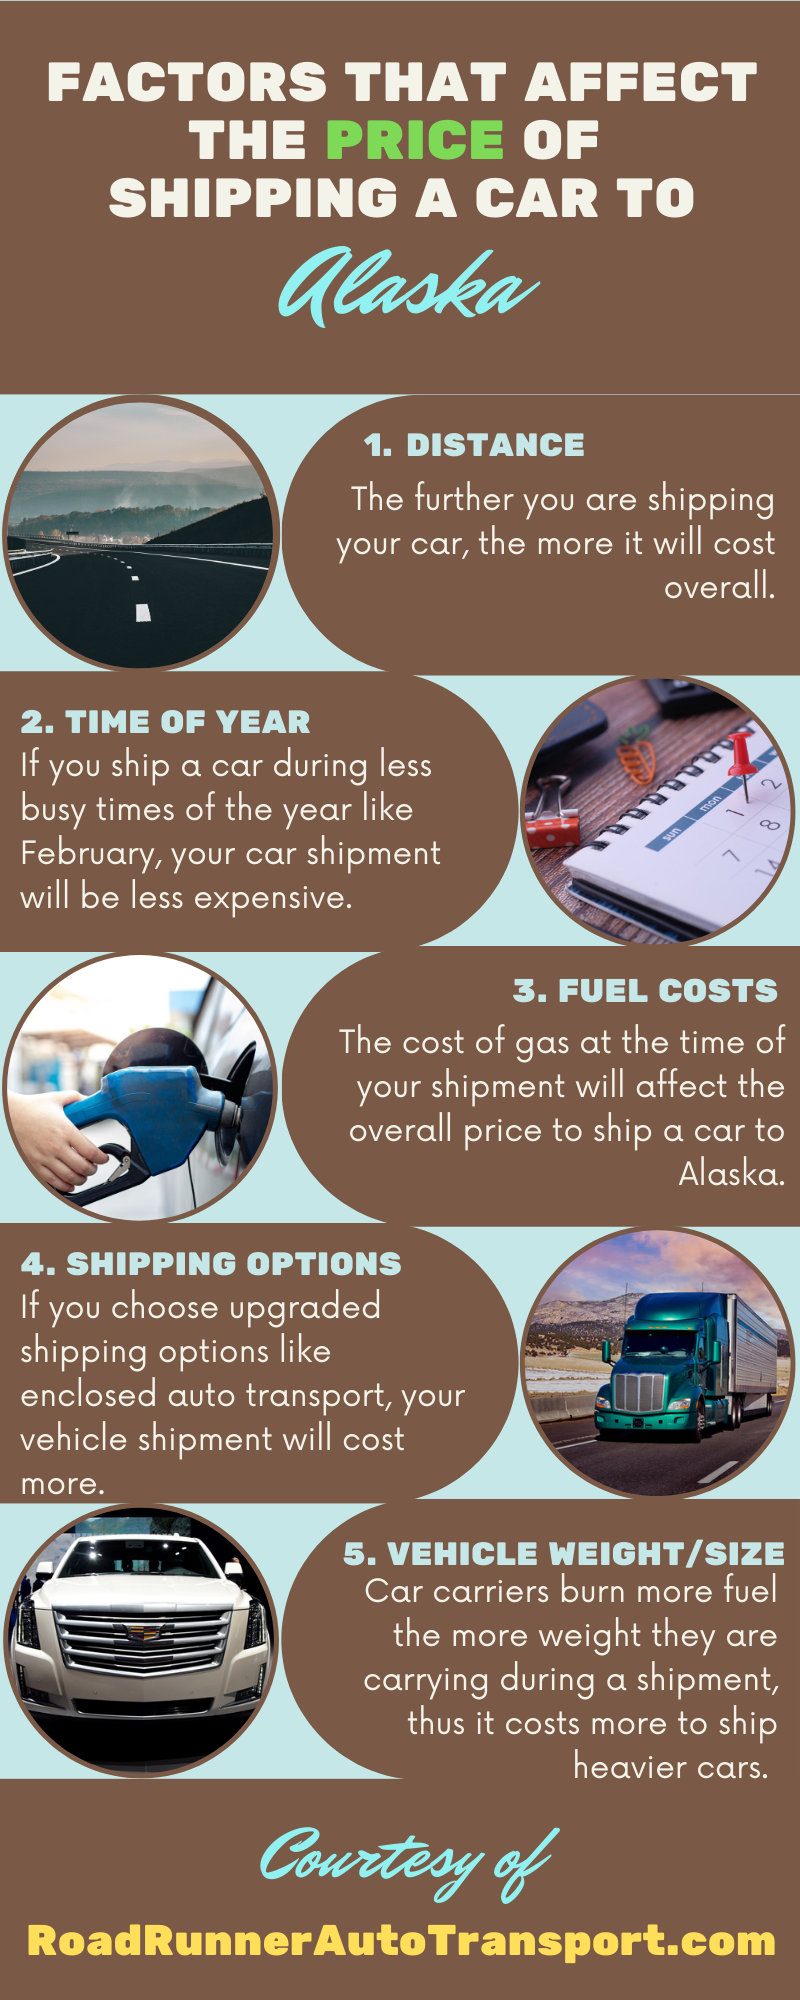 factors that affect the price of car shipping